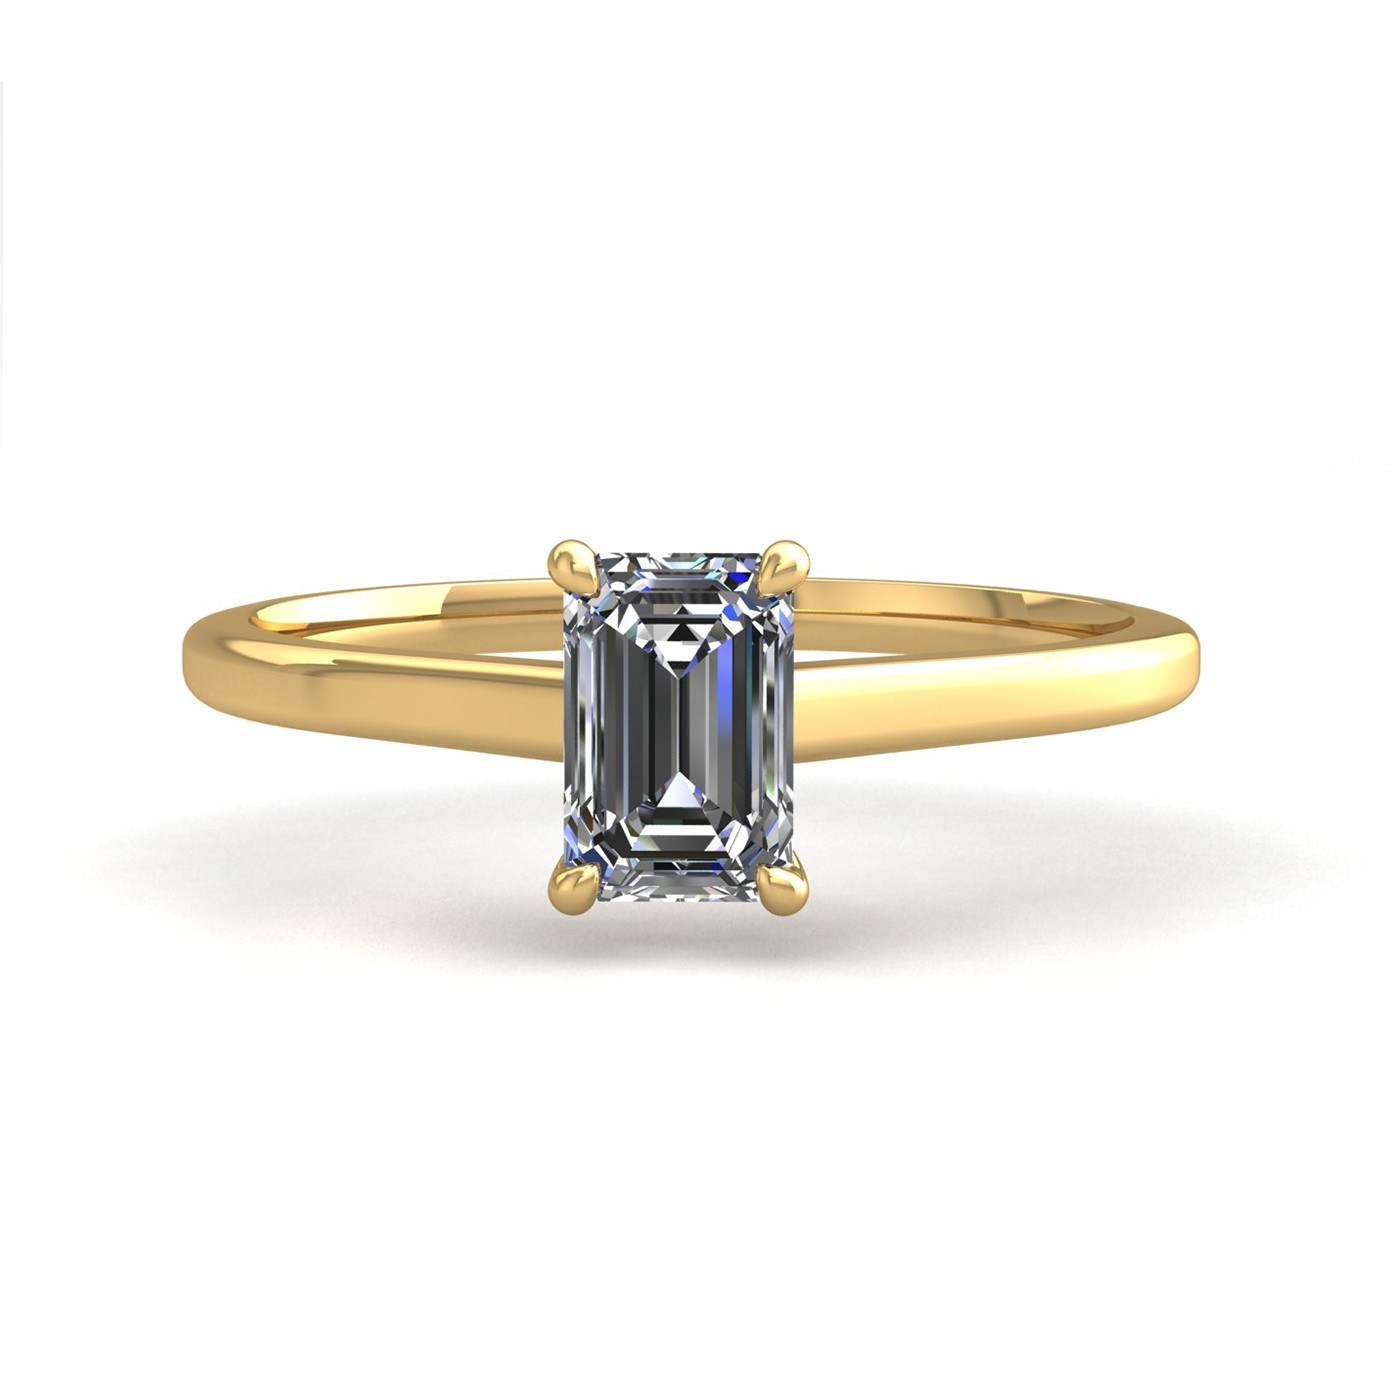 18k rose gold  0,50 ct 4 prongs solitaire emerald cut diamond engagement ring with whisper thin band Photos & images